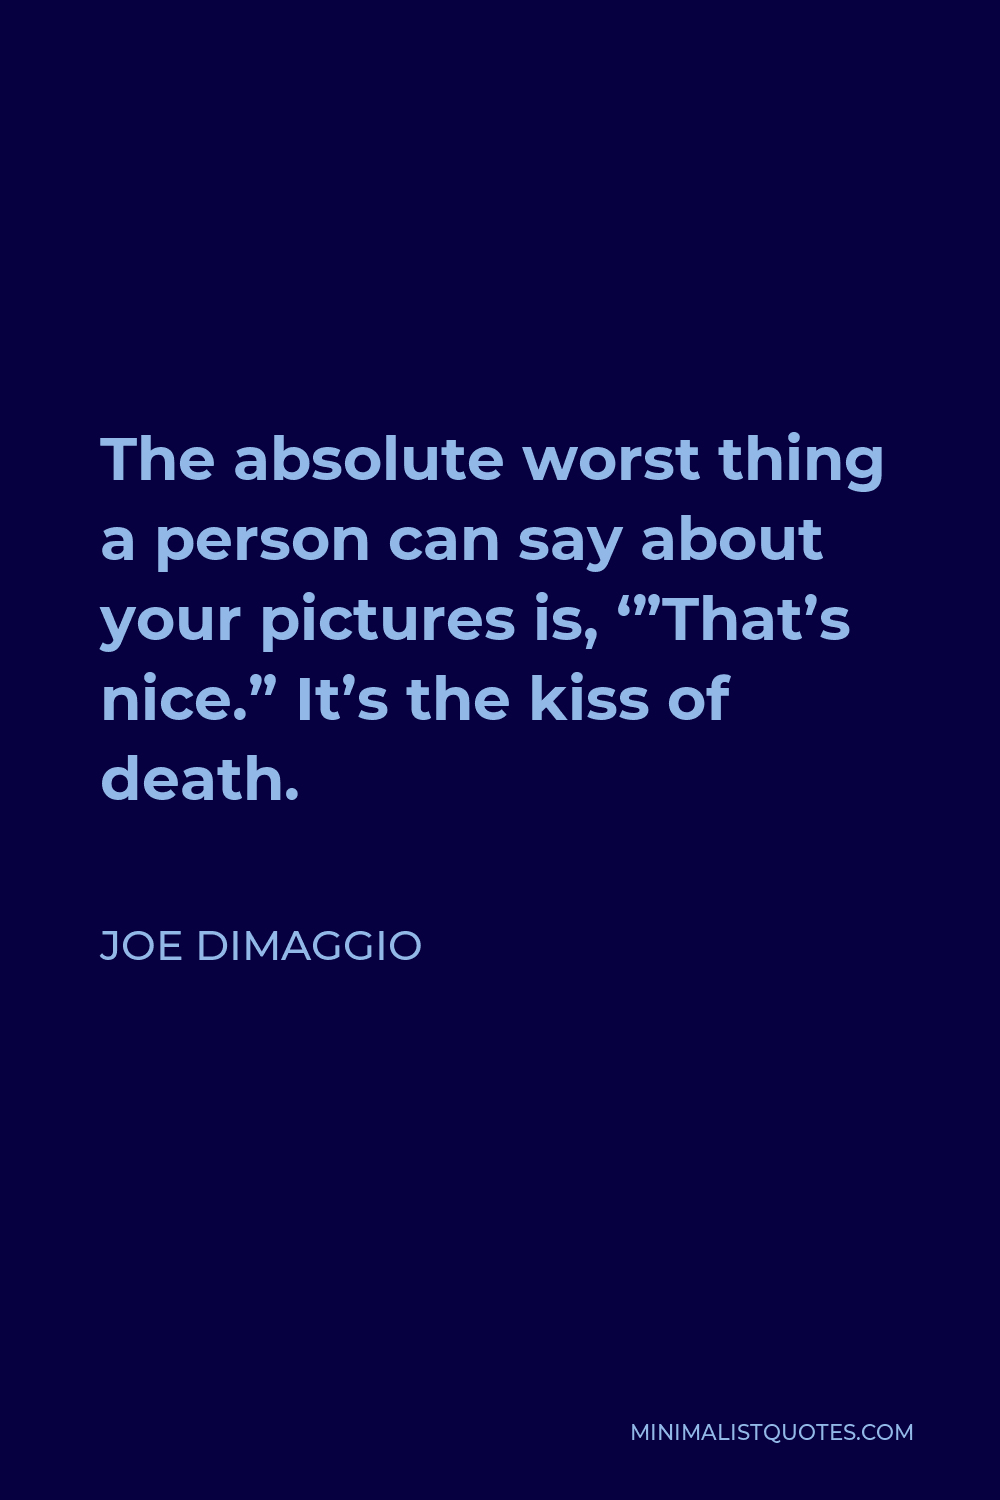 Joe DiMaggio Quote - The absolute worst thing a person can say about your pictures is, ‘”That’s nice.” It’s the kiss of death.